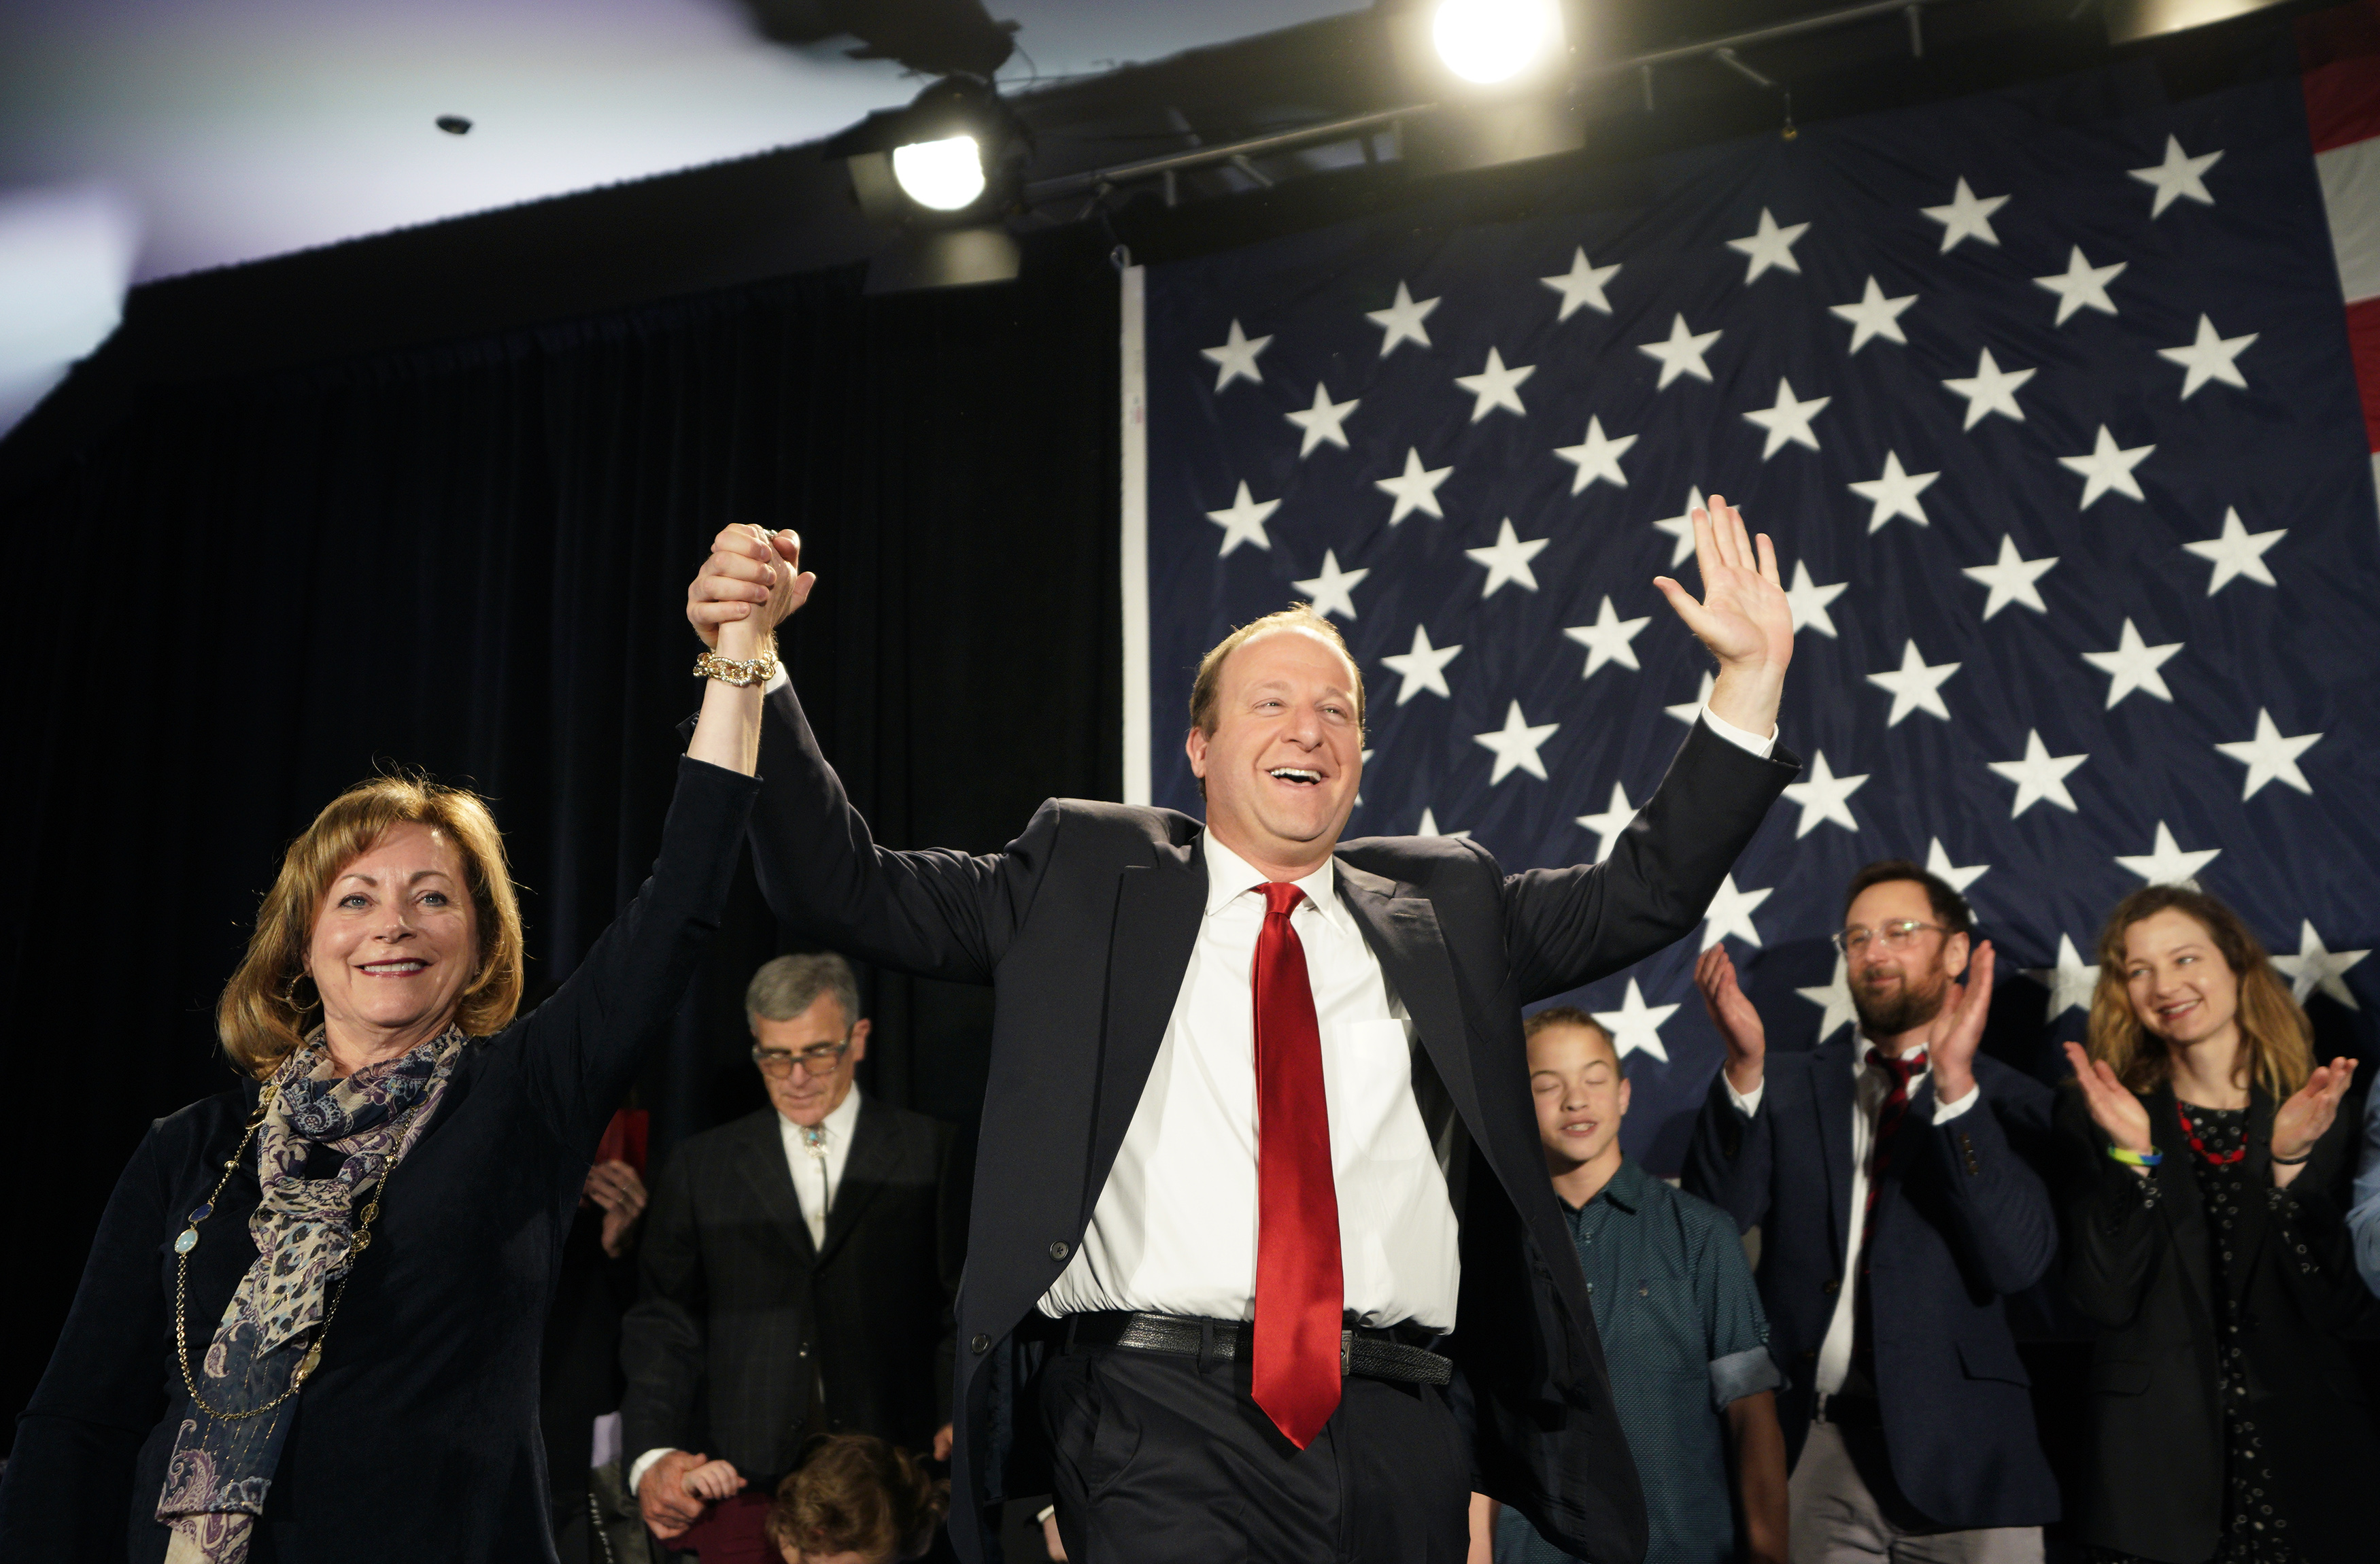 Democratic Colorado Governor-elect Jared Polis arrives onstage with running mate Dianne Primavera on November 6, 2018 in Denver, Colorado. (Rick T. Wilking/Getty Images)